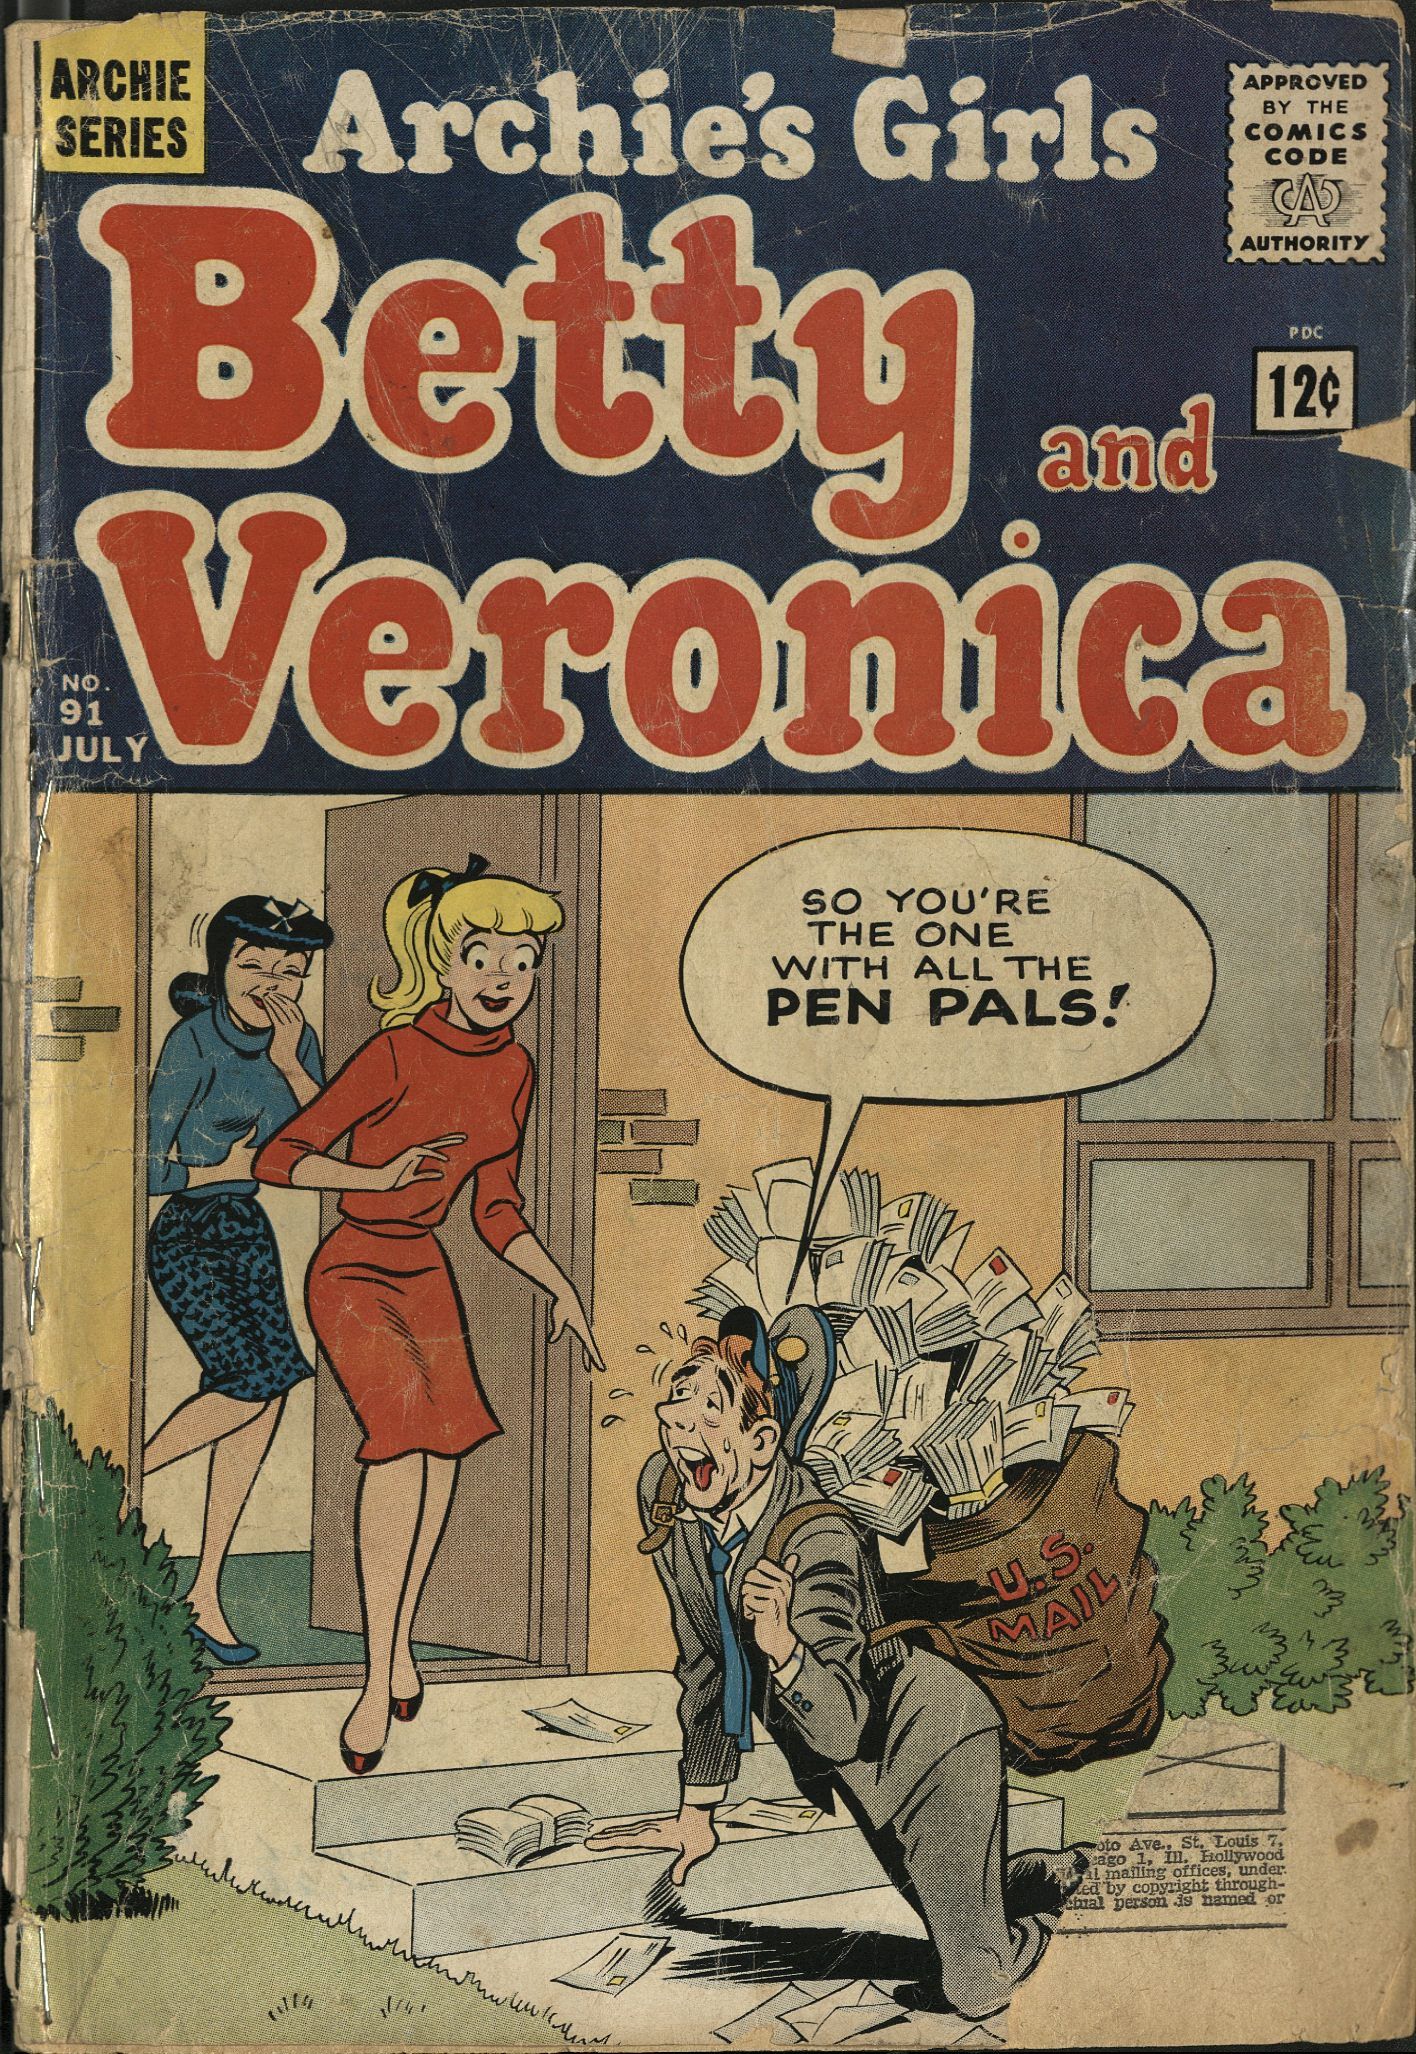 Cover of Archie comic with Betty and Veronica standing in doorway